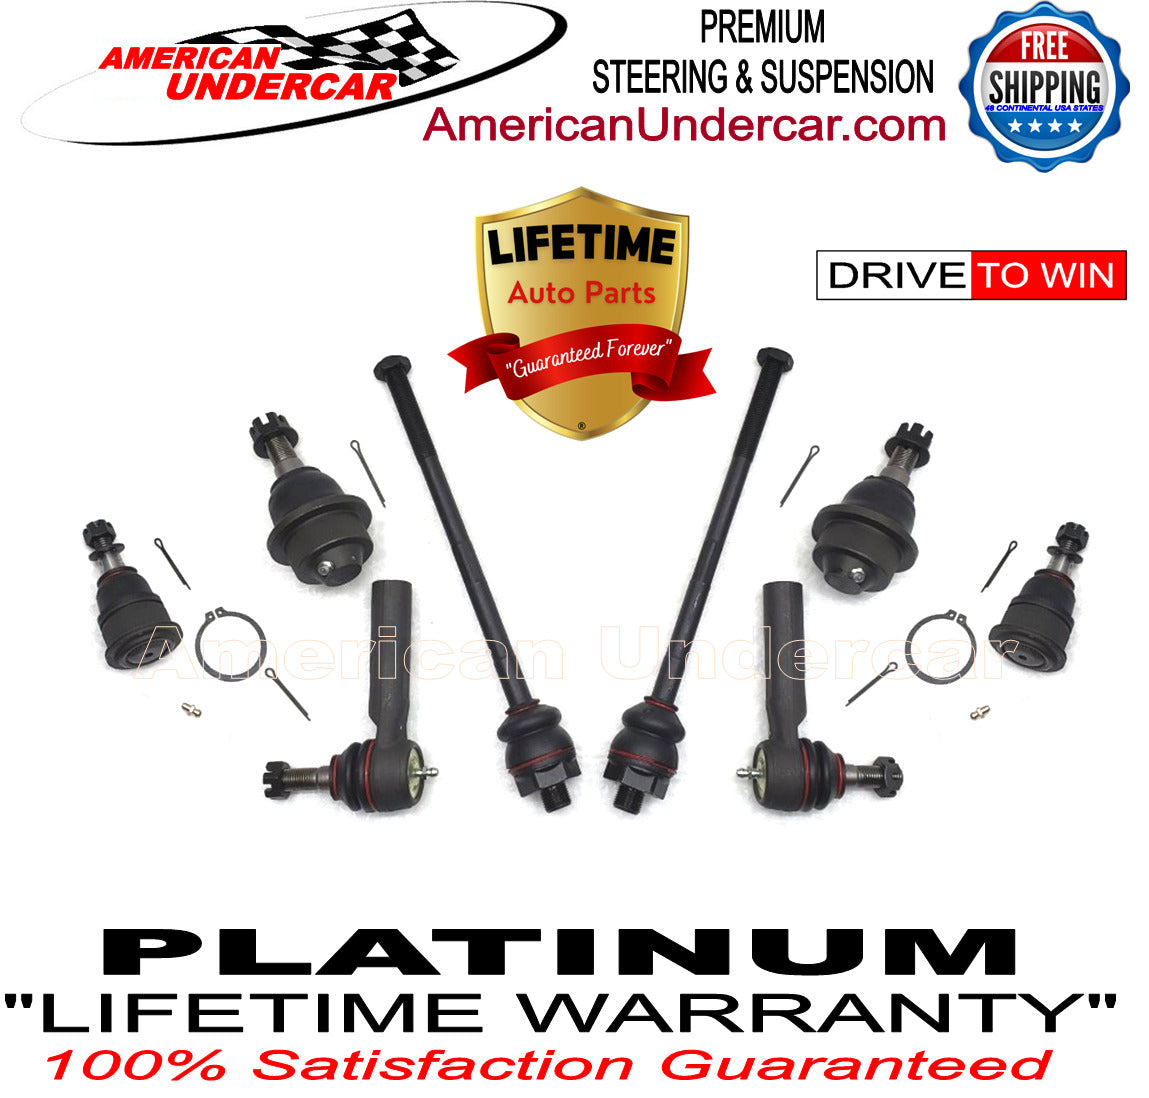 Lifetime Ball Joints and Tie Rod Ends Steering Kit for 2001-2010 Chevrolet, GMC 1500HD, 2500HD, 3500HD, 2WD, 4x4